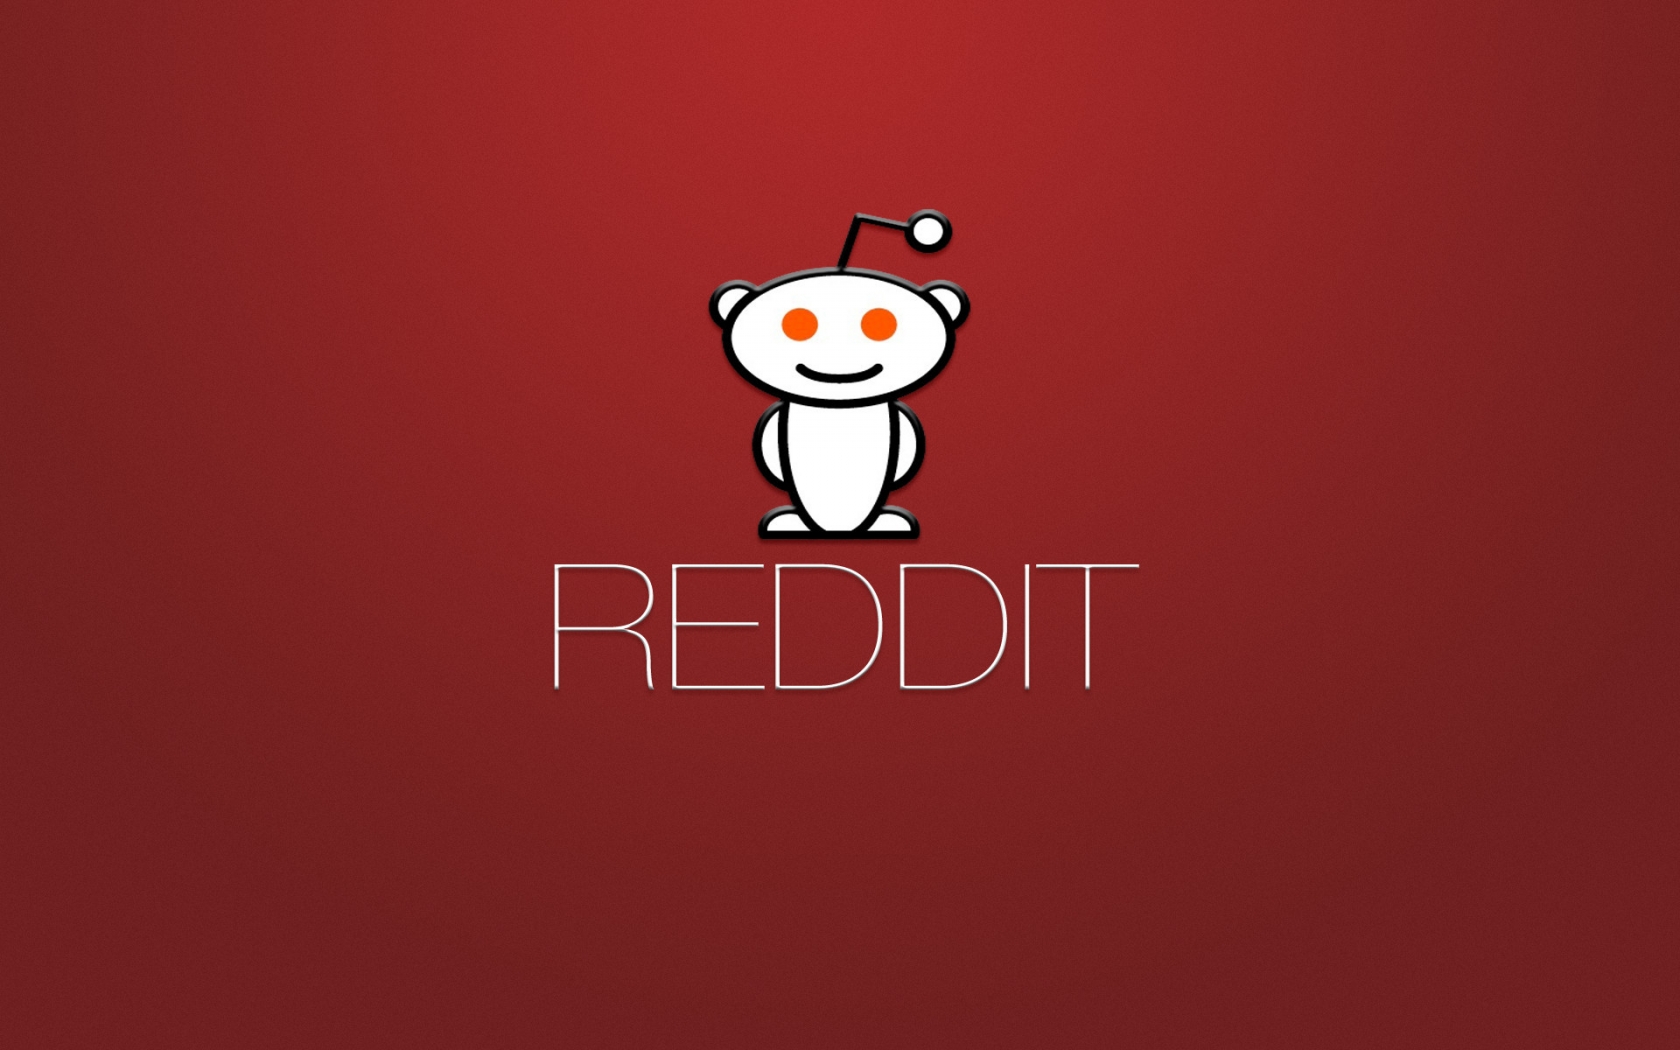 Reddit for 1680 x 1050 widescreen resolution